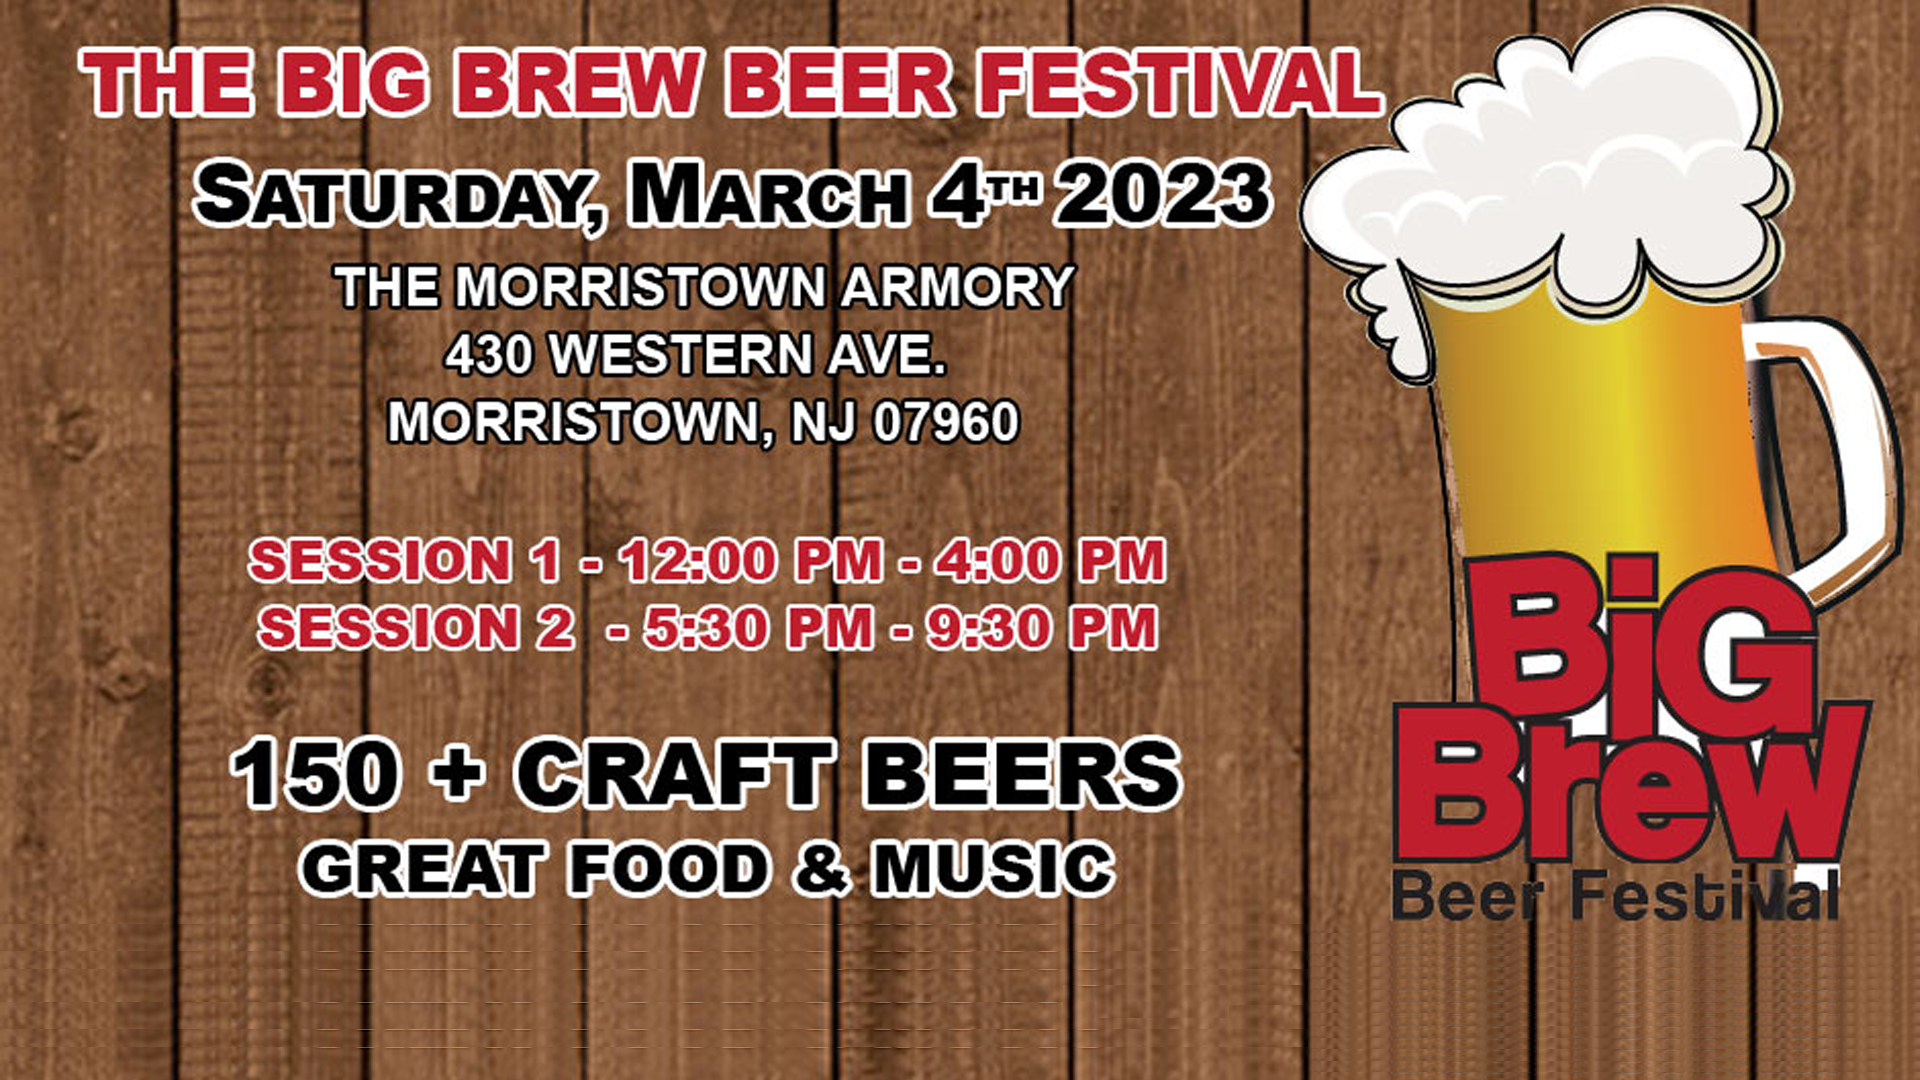 Big Brew Beer Festival in Morristown, NJ on March 4th